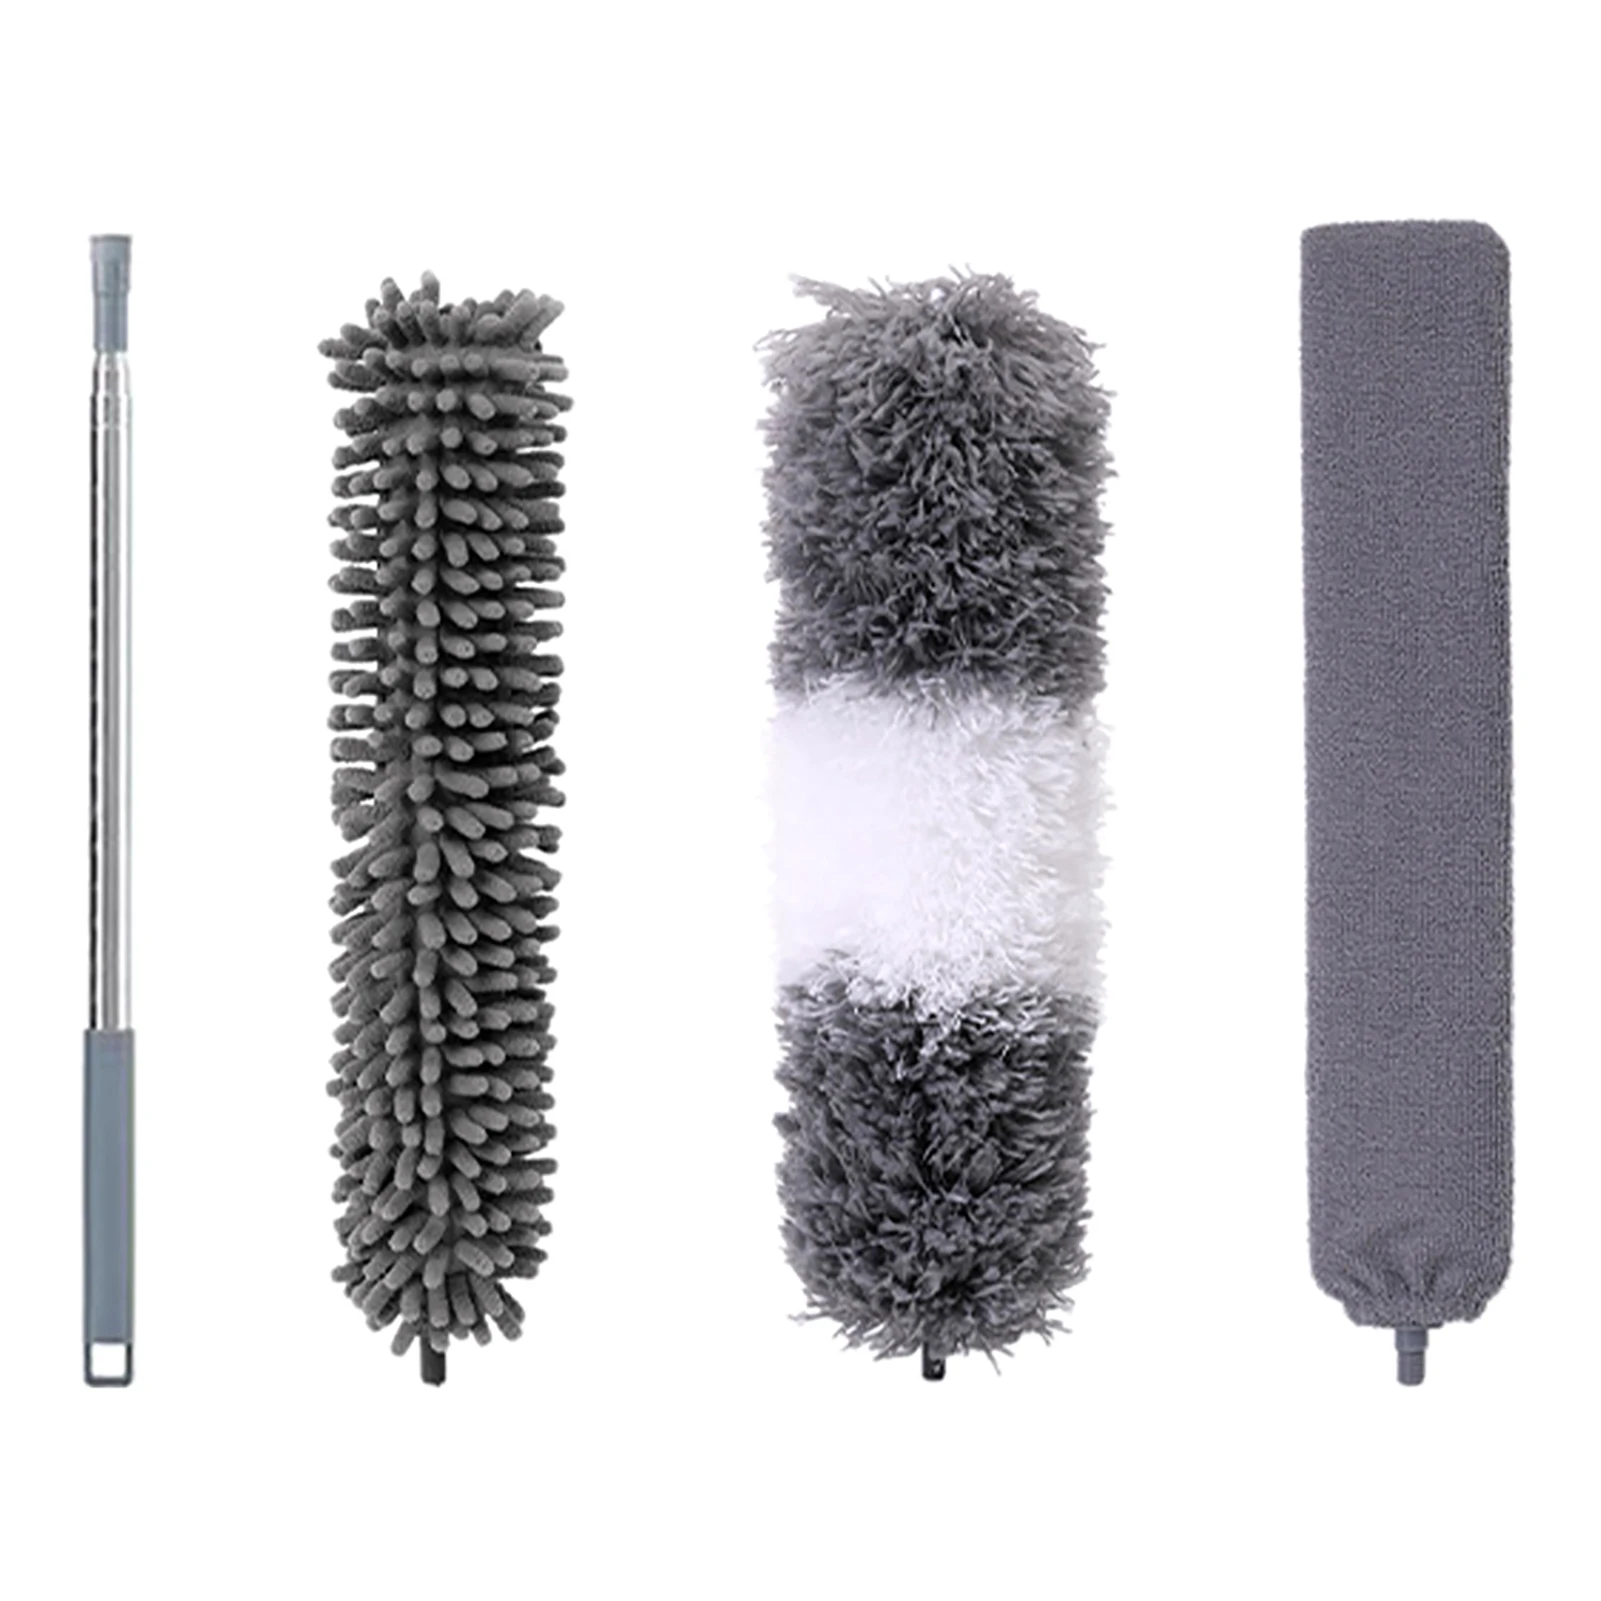 3 In 1 Blinds High Ceiling Crevice Brush Car Cobweb Bendable Microfiber Duster Kit Home With Extension Pole Telescopic Furniture